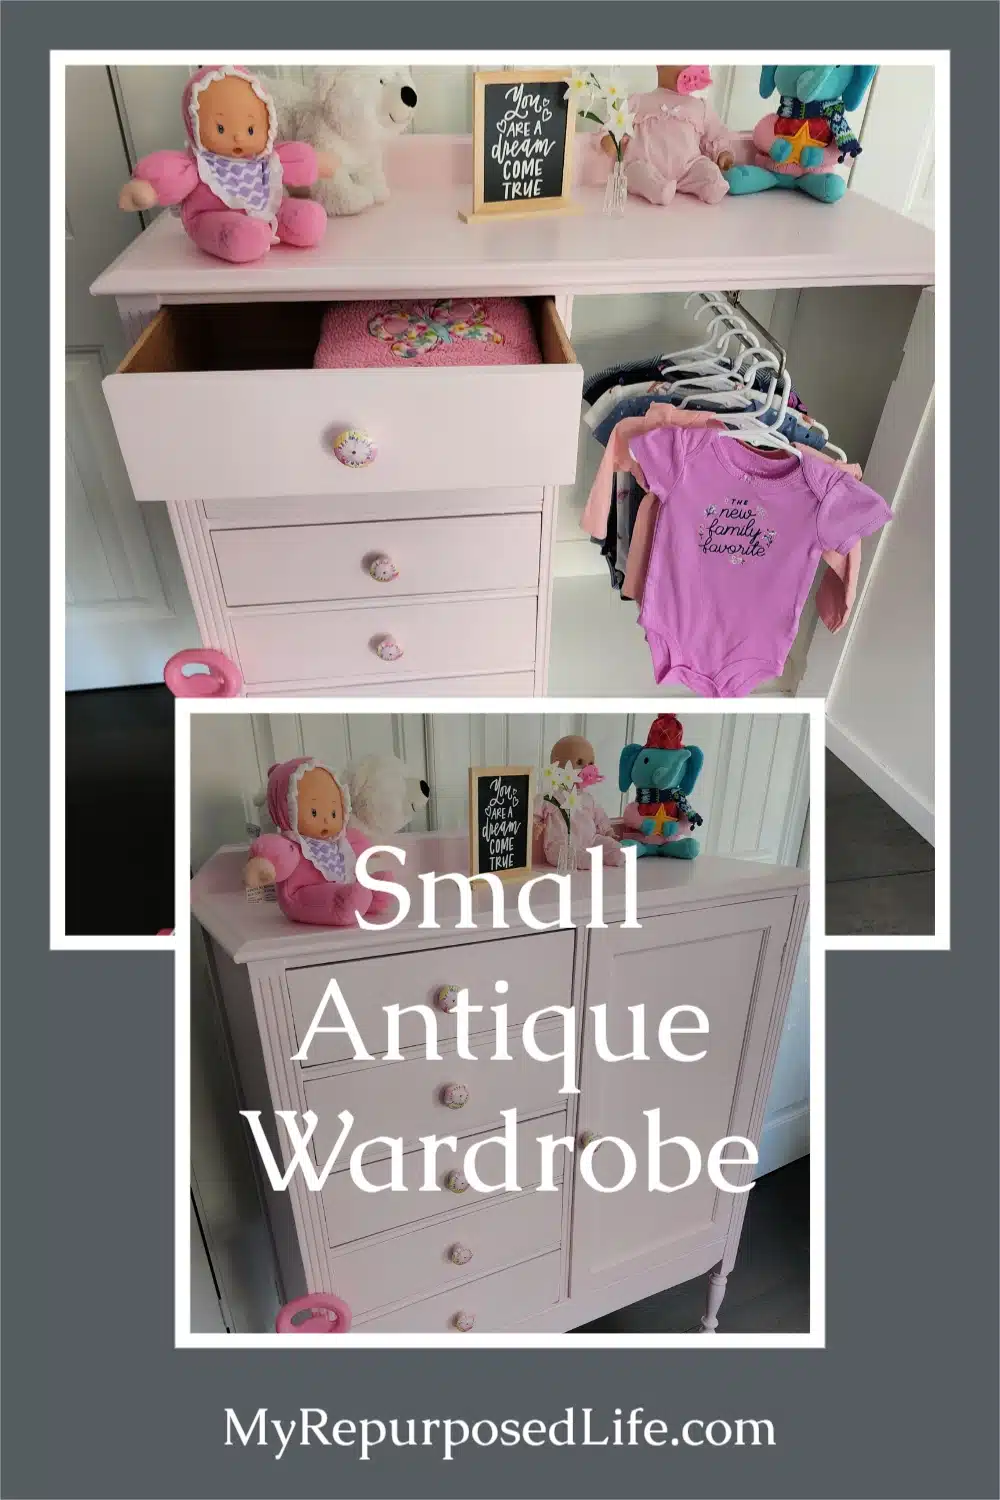 How To Paint An Old Wardrobe: A Quick And Easy Guide. Loaded with lots of tips to do an antique wardrobe makeover with paint and decoupage. #MyRepurposedLife #upcyle #furniture #makeover via @repurposedlife